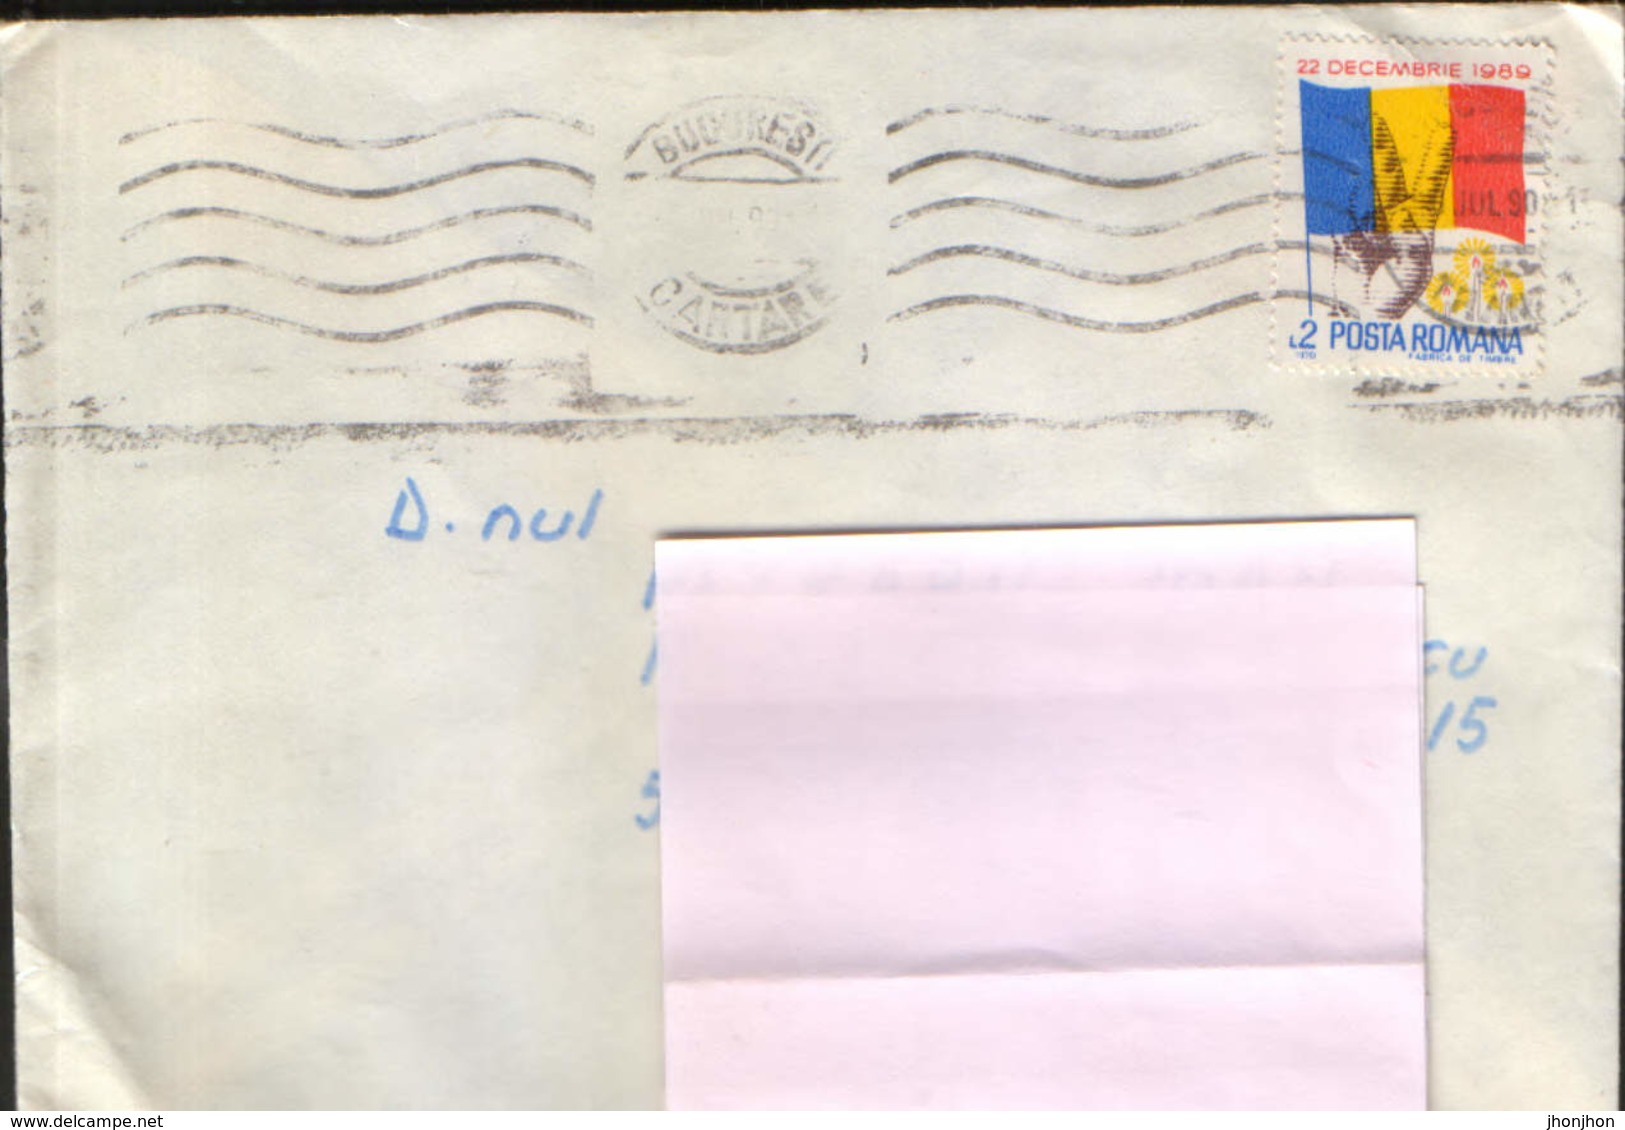 Romania - Letter Circulated In 1990 -  Stamp With The Romanian Revolution Of 1989 - Covers & Documents